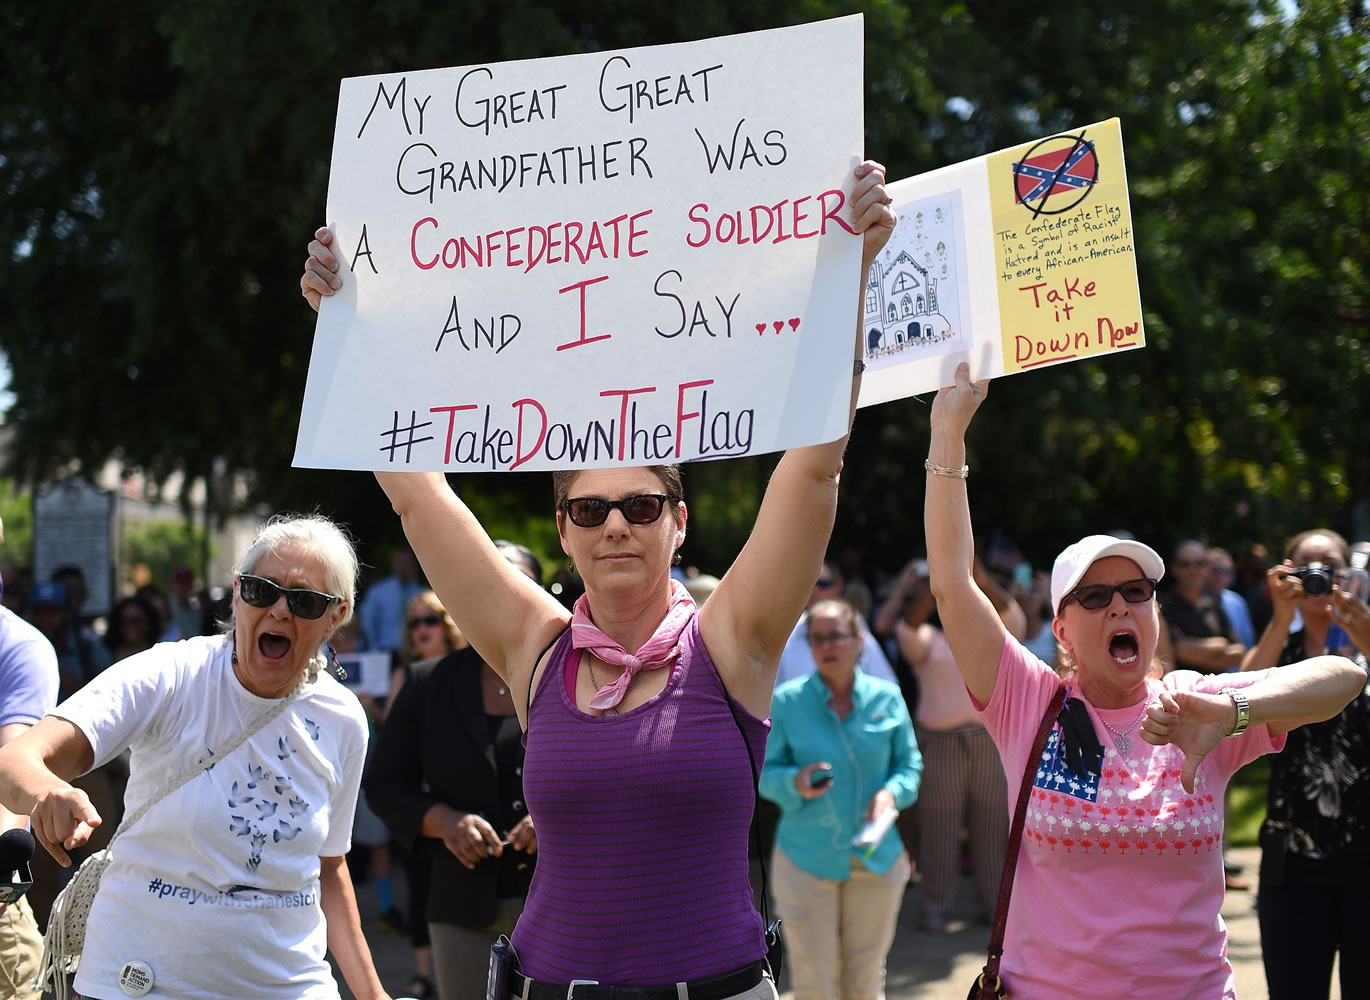 Protesters hold signs as they chant during a rally to take down the Confederate flag at the South Carolina Statehouse on Tuesday in Columbia, S.C.